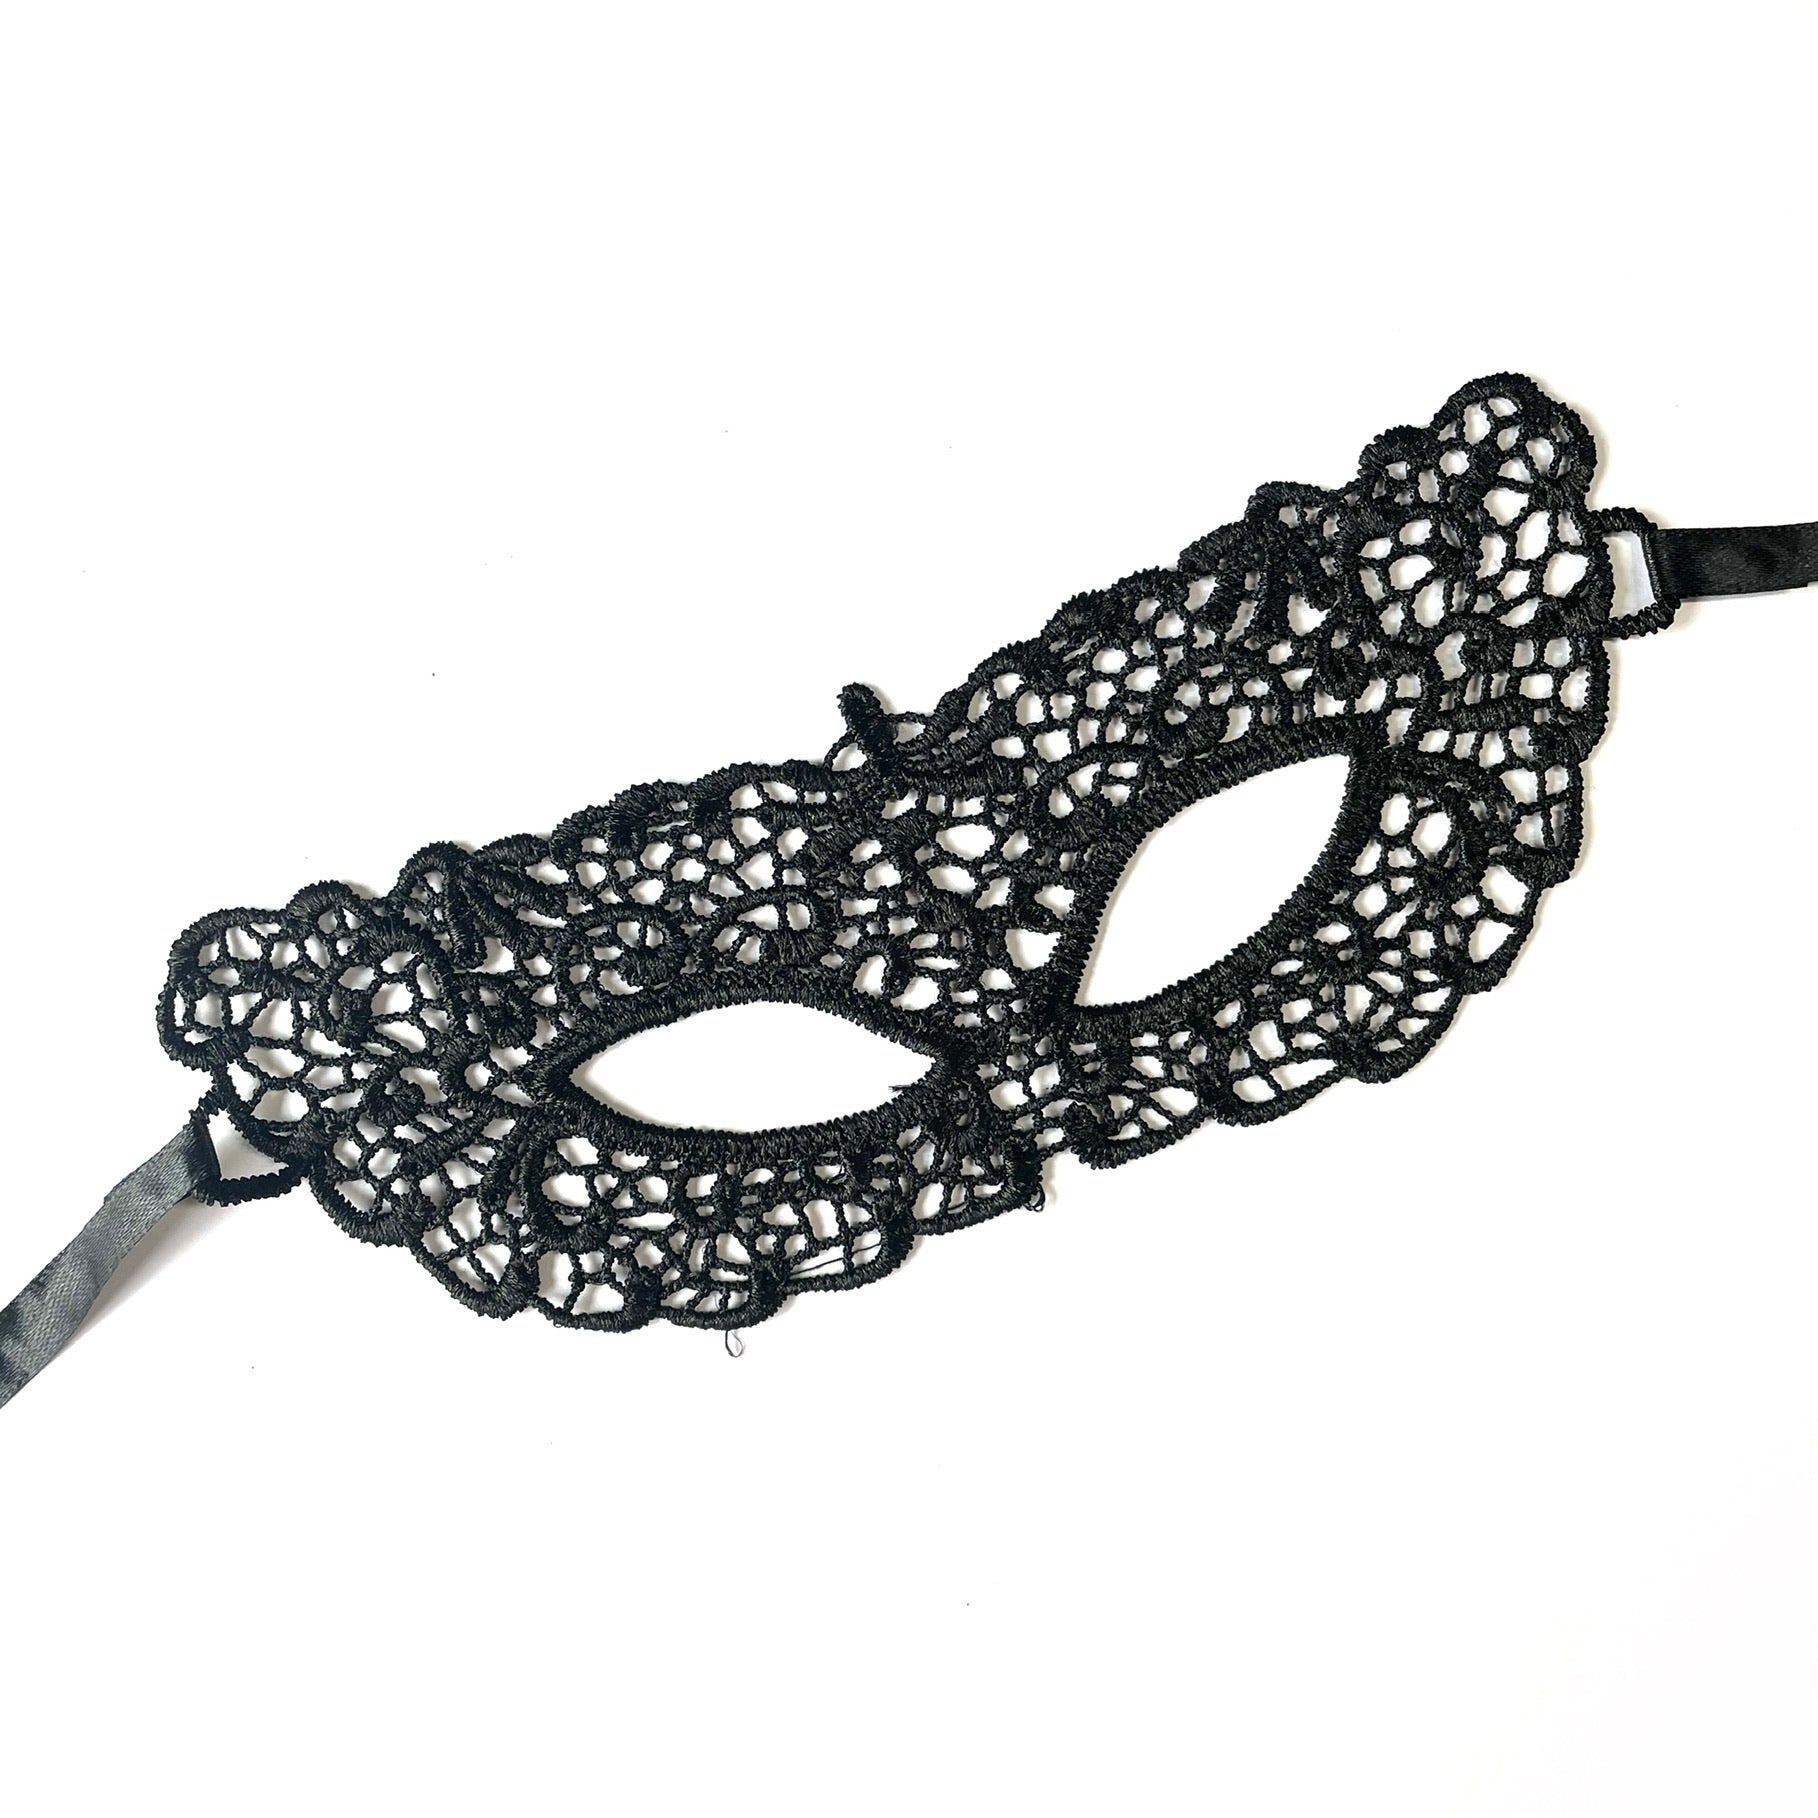 Women Lace Sexy Elegant Masquerade Ball Party Mask - Black (Style 9)